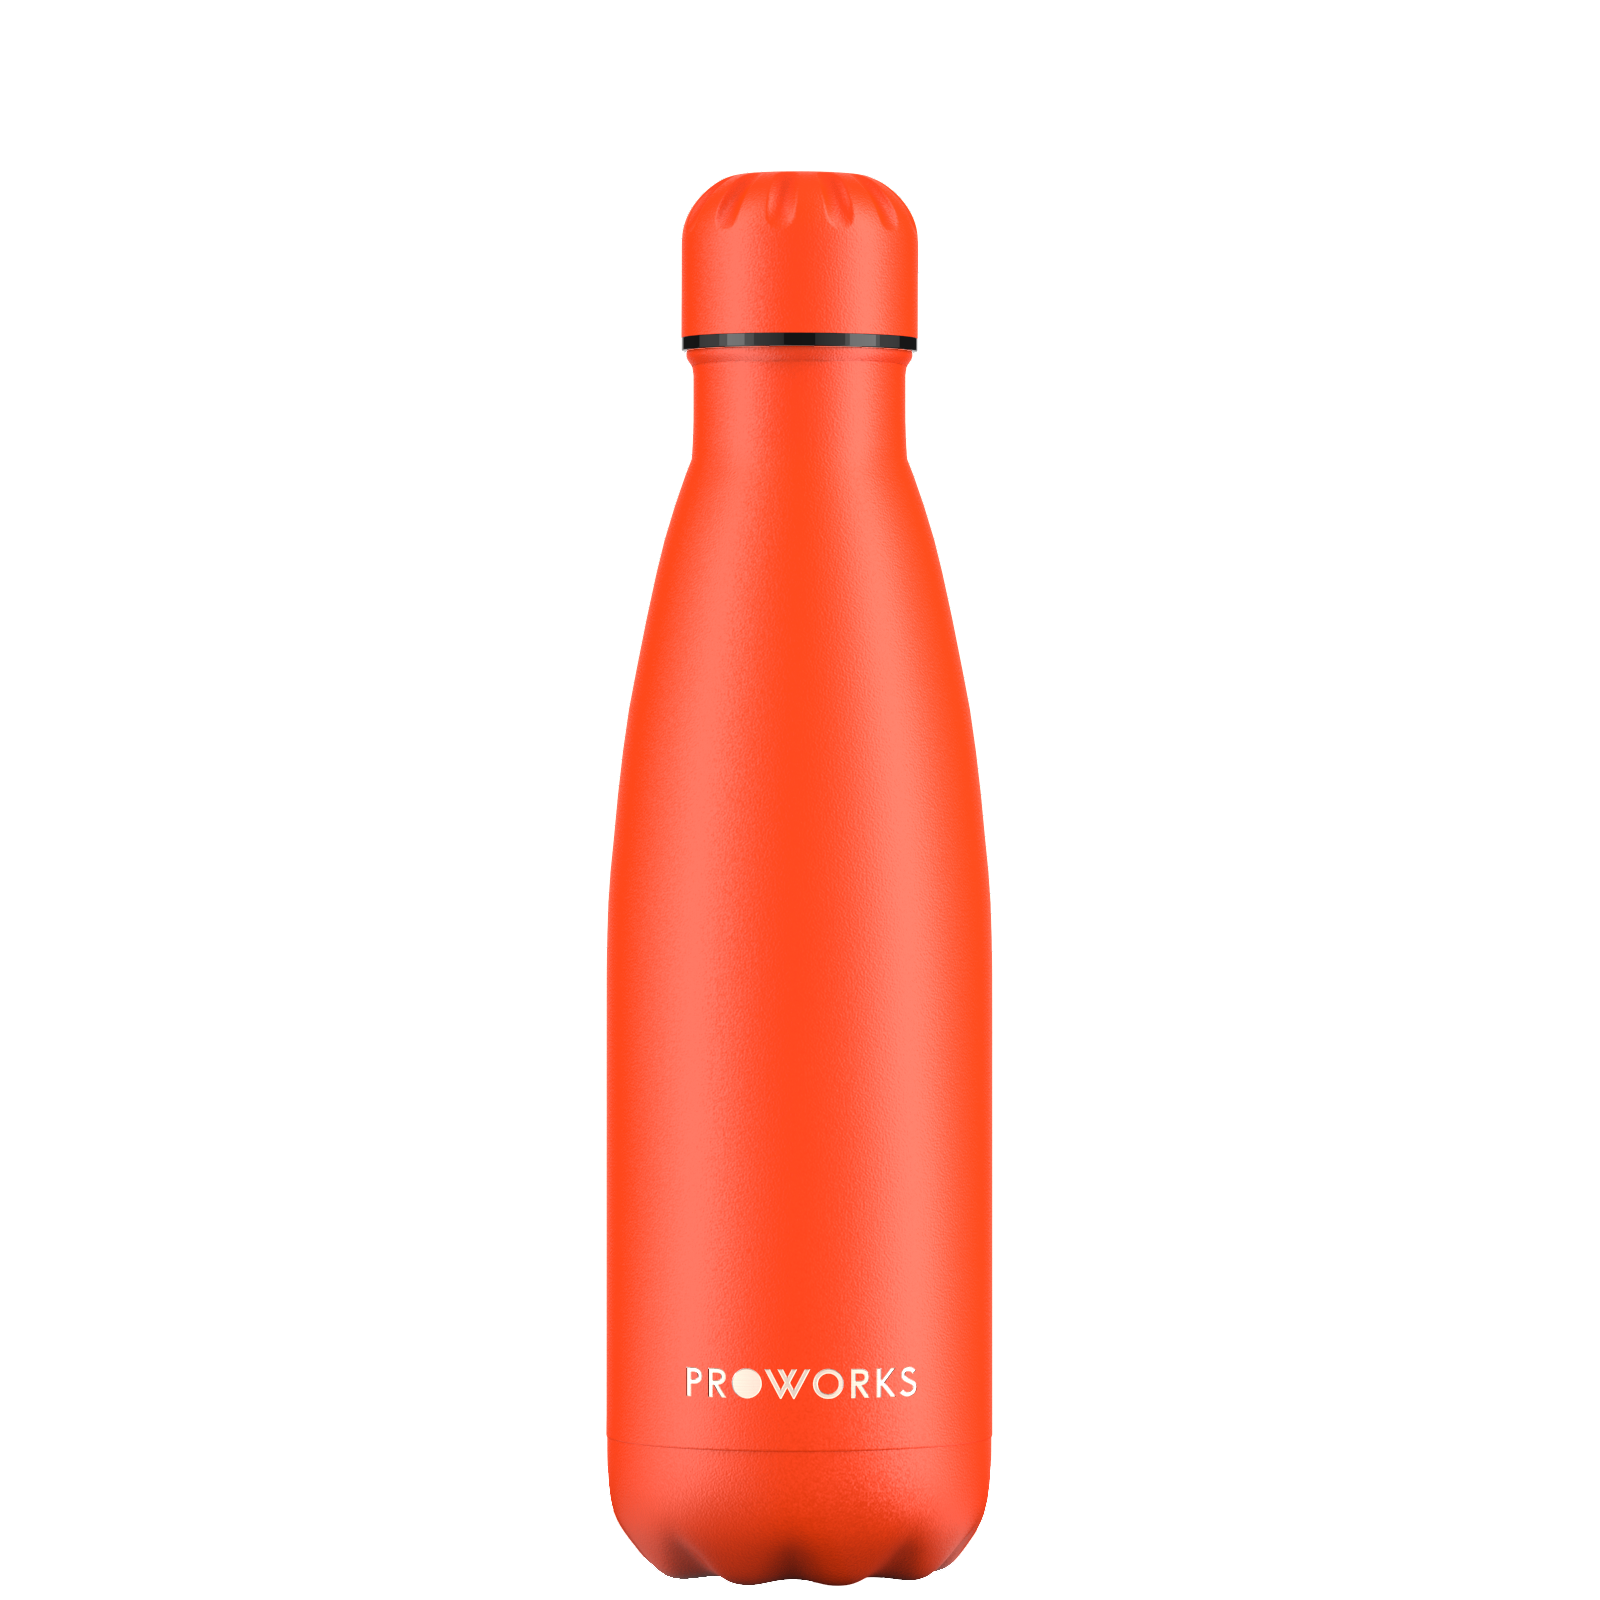 Proworks Oxy Fire Red 500ml Water Bottle